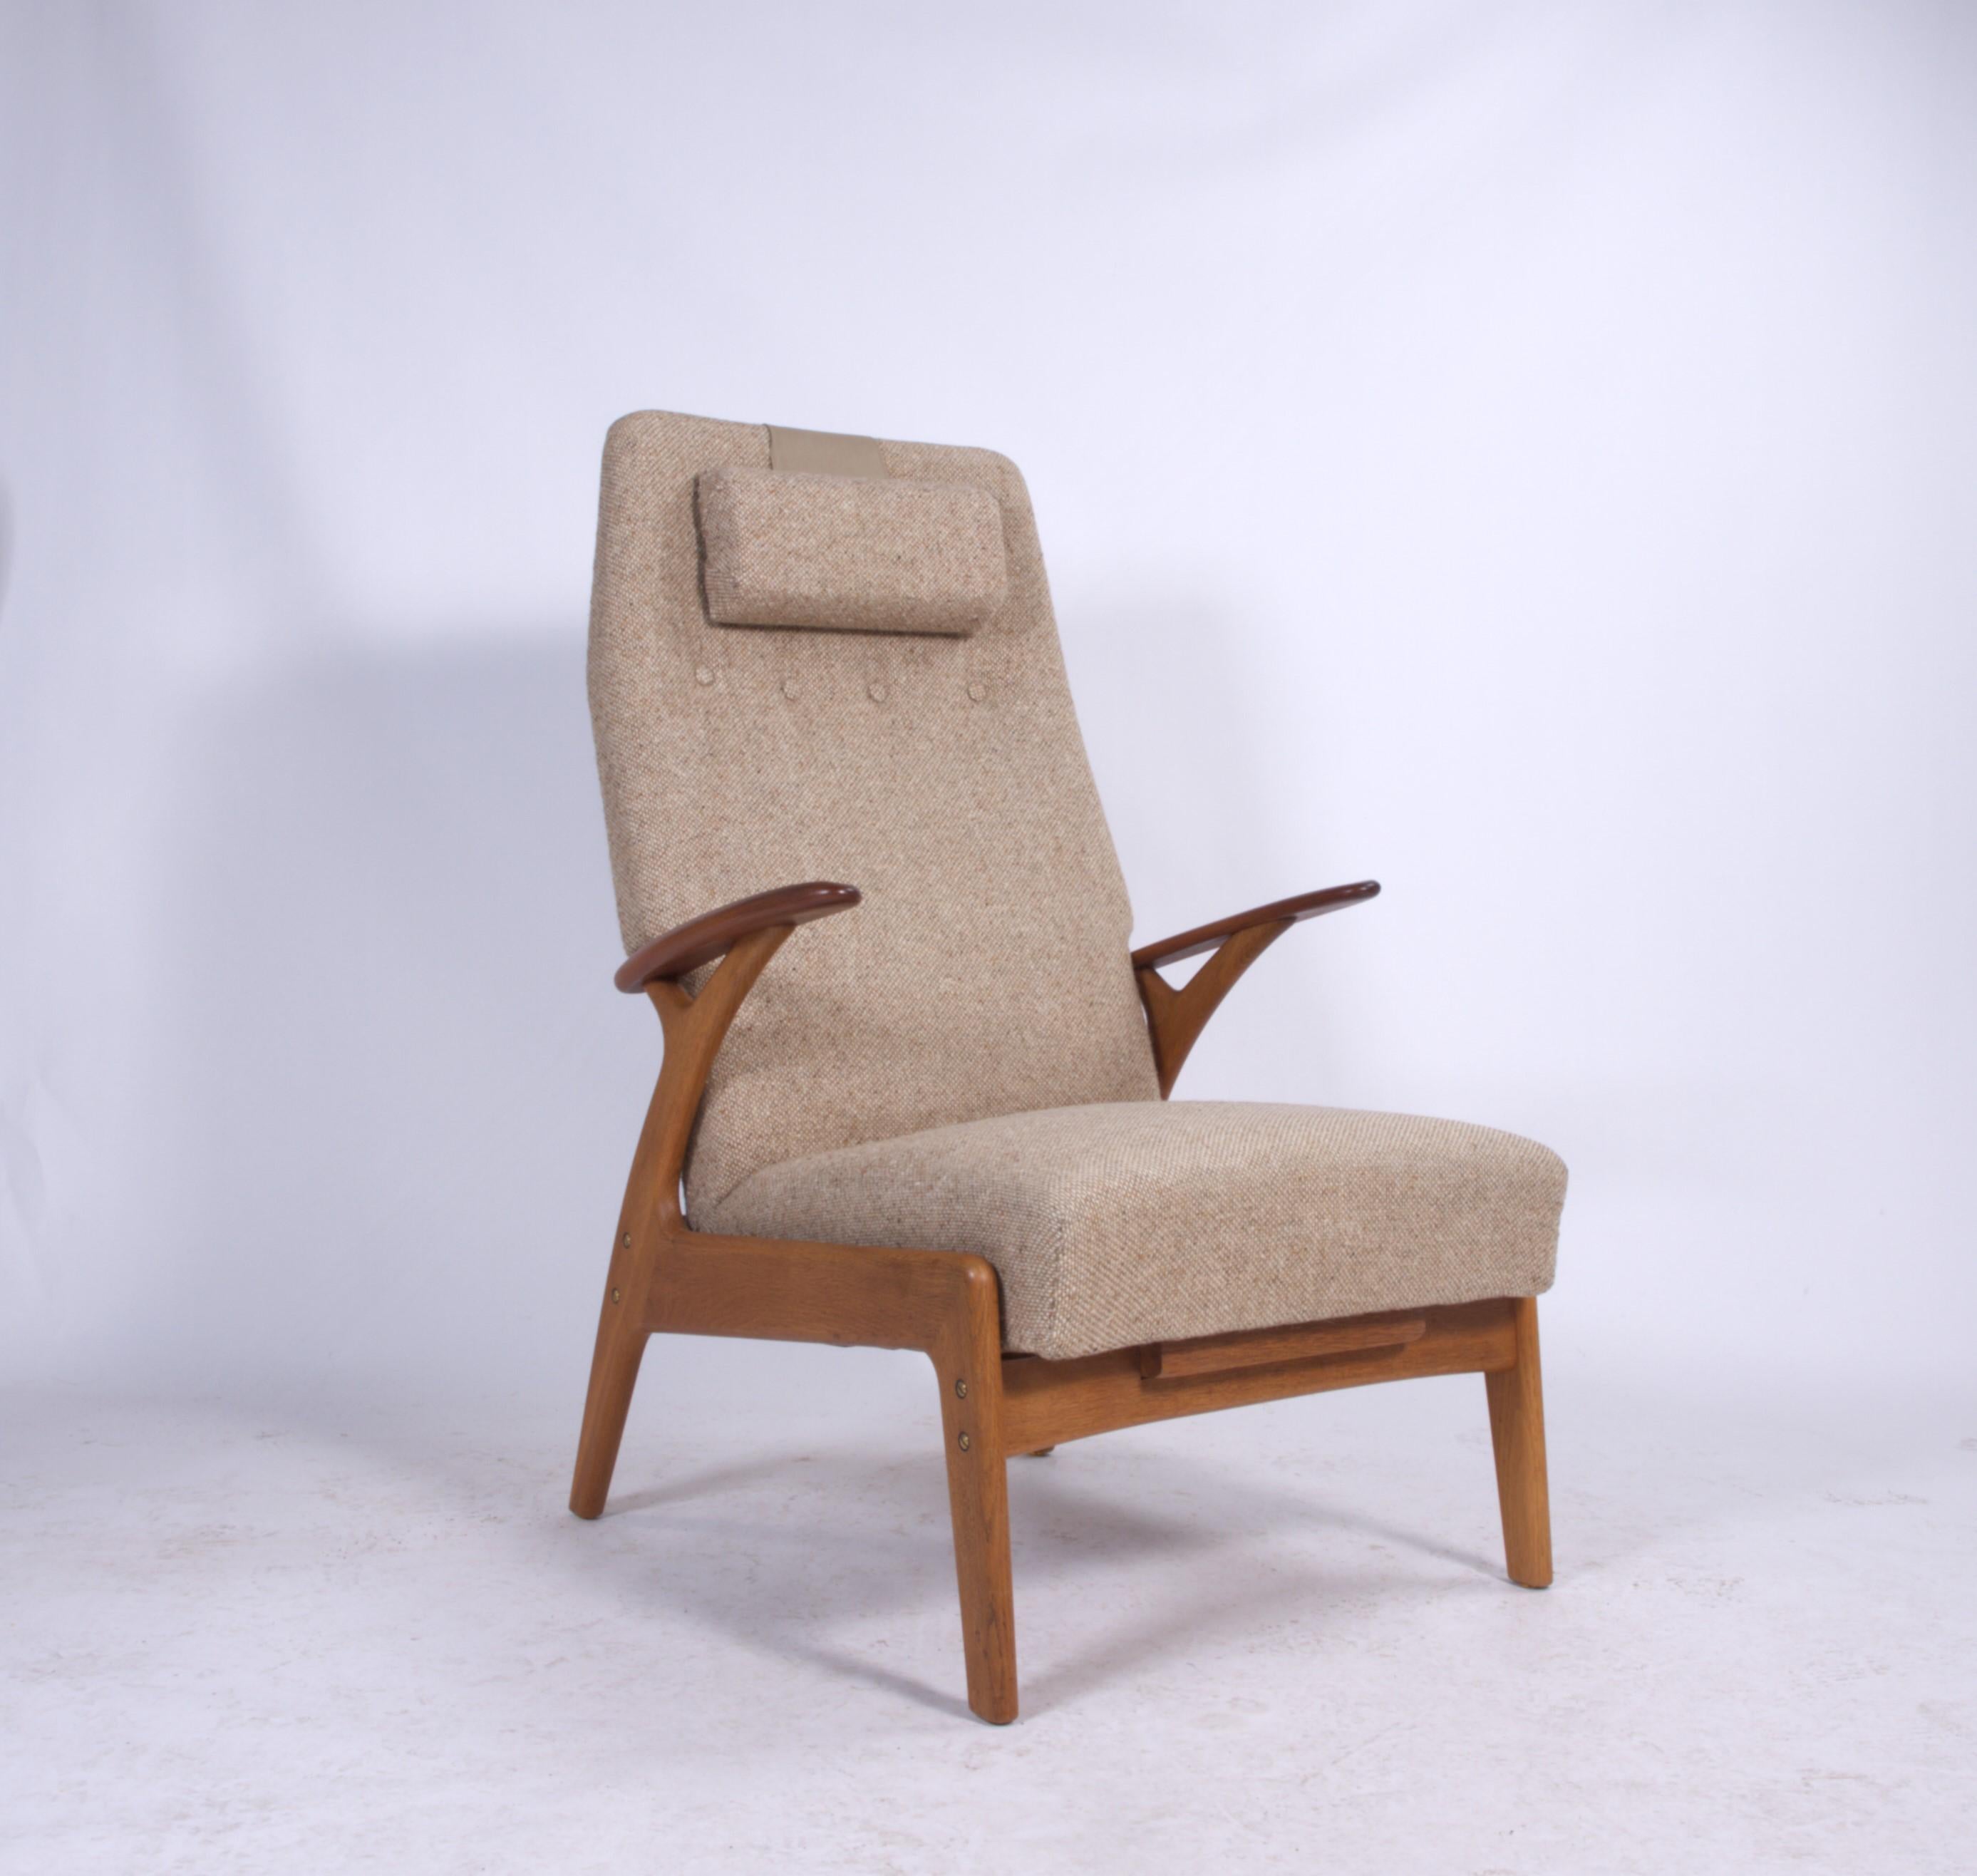 Not made by Erik Christian Sørensen, but 1stdibs doesn't have him on their list. Made by the Danish architect Christian Sørensen who designed this chair in the late 1950s and was produced through the 1960s at Gorm Furniture Factory.

The chair has